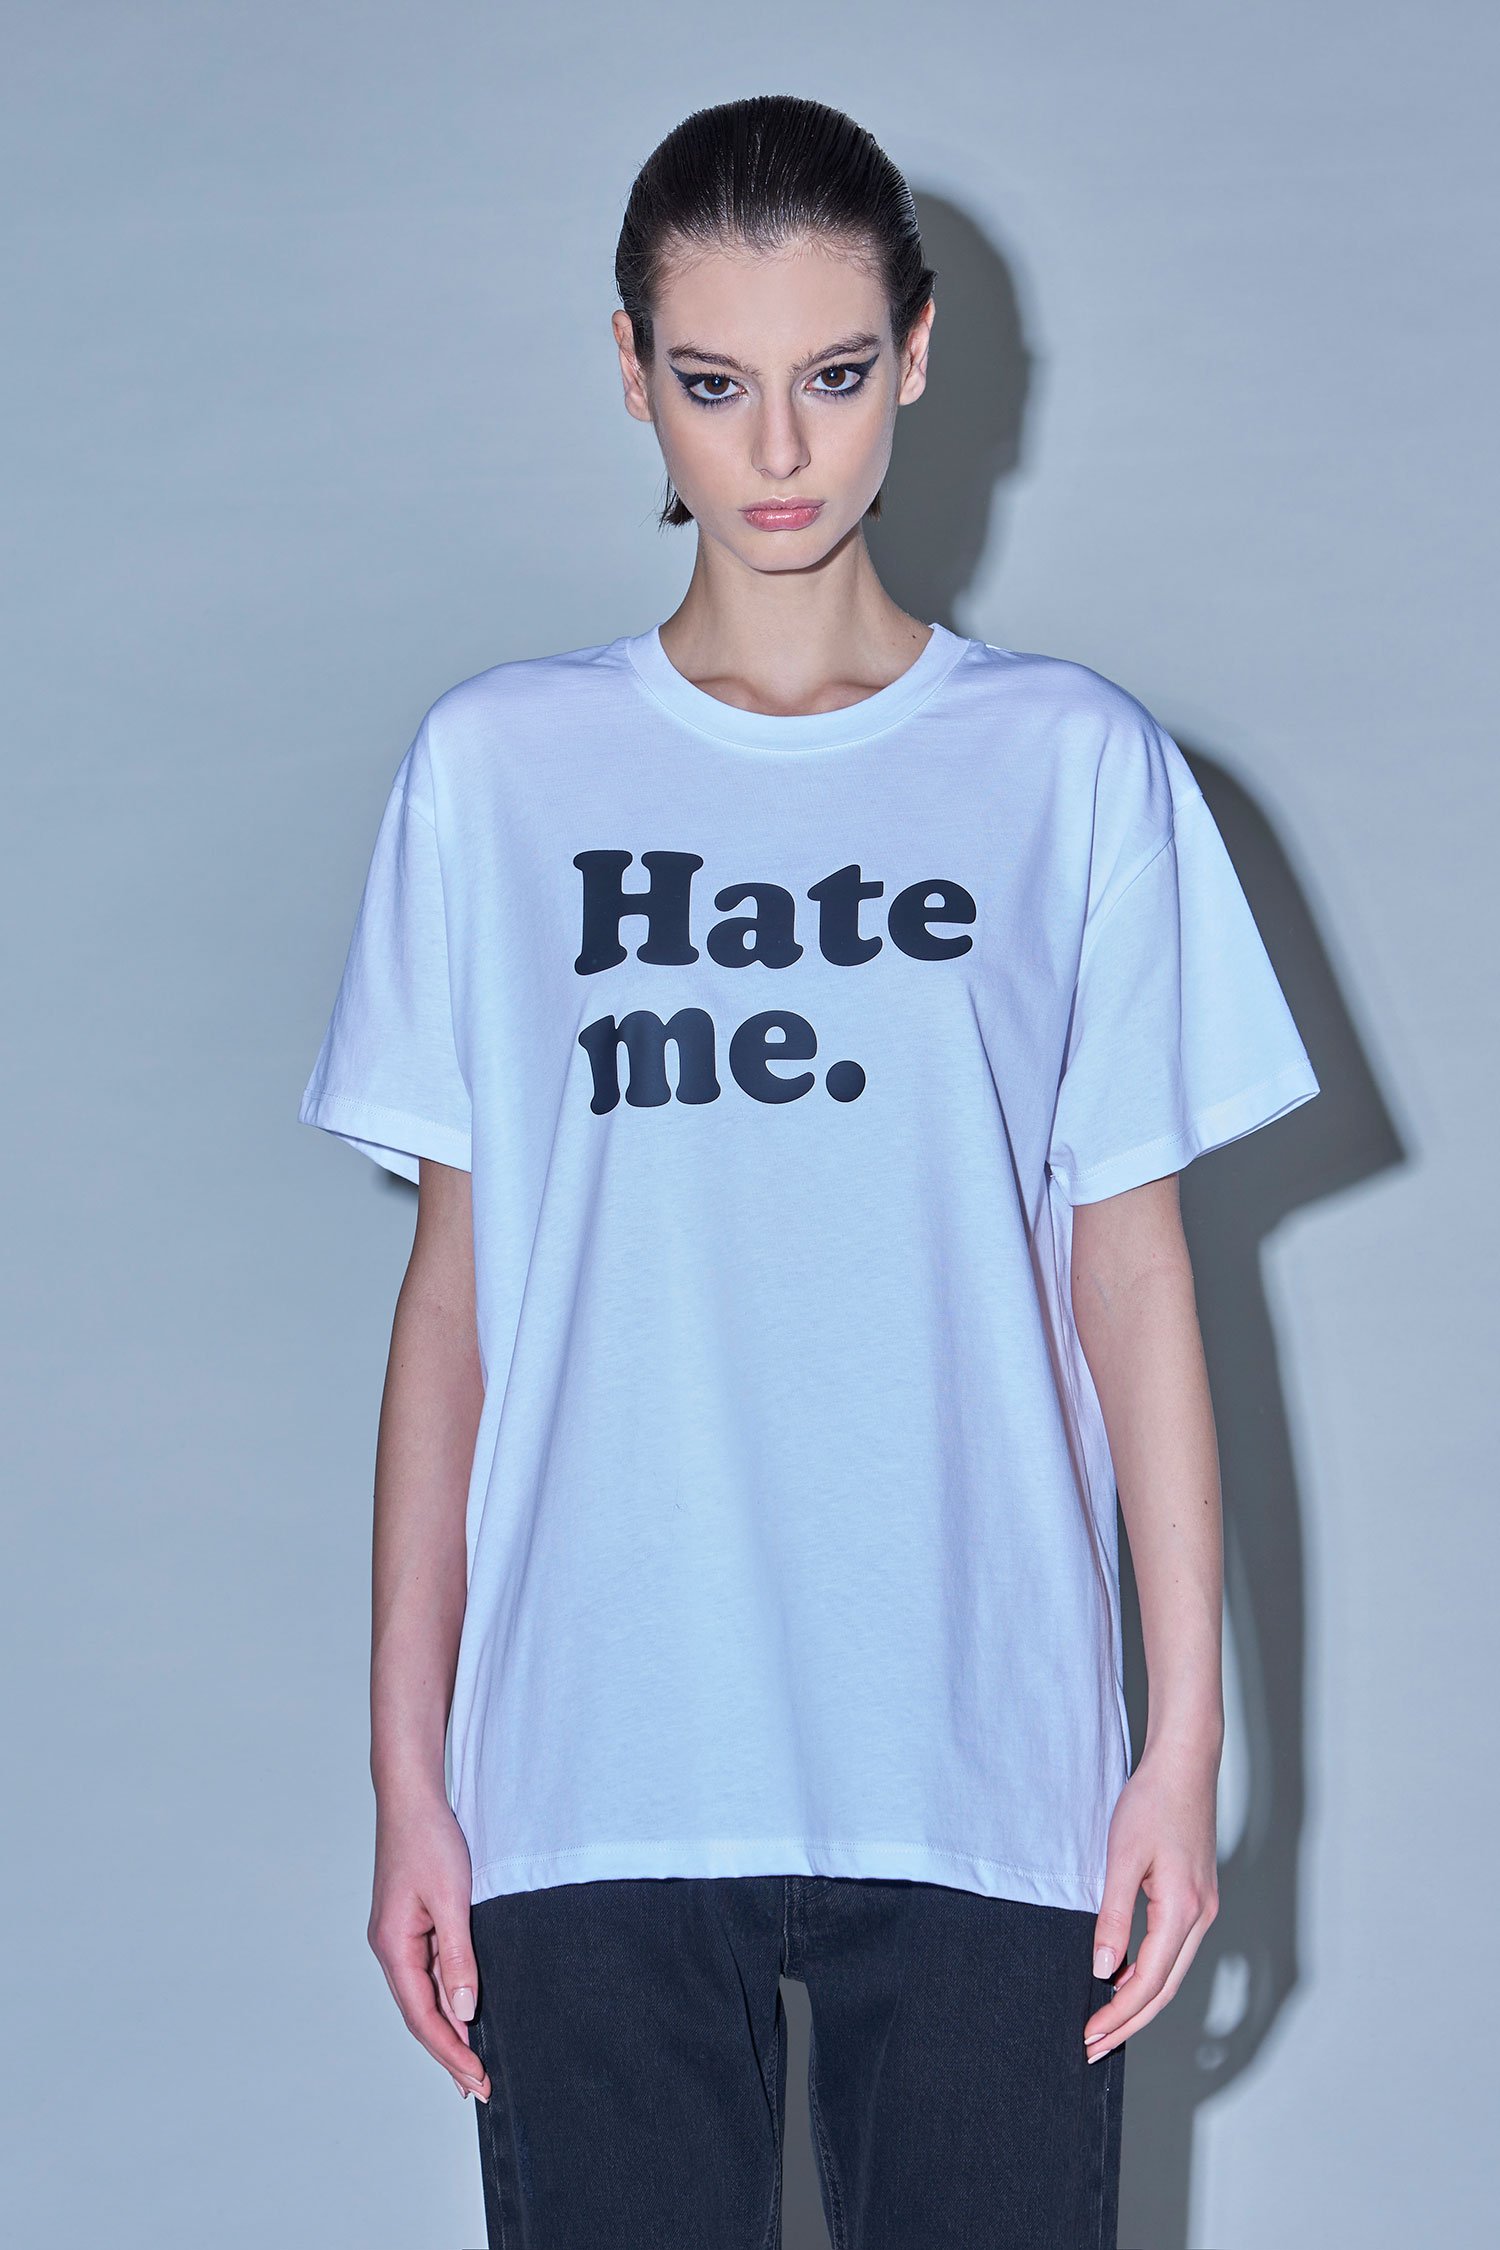 T-SHIRT HATE ME